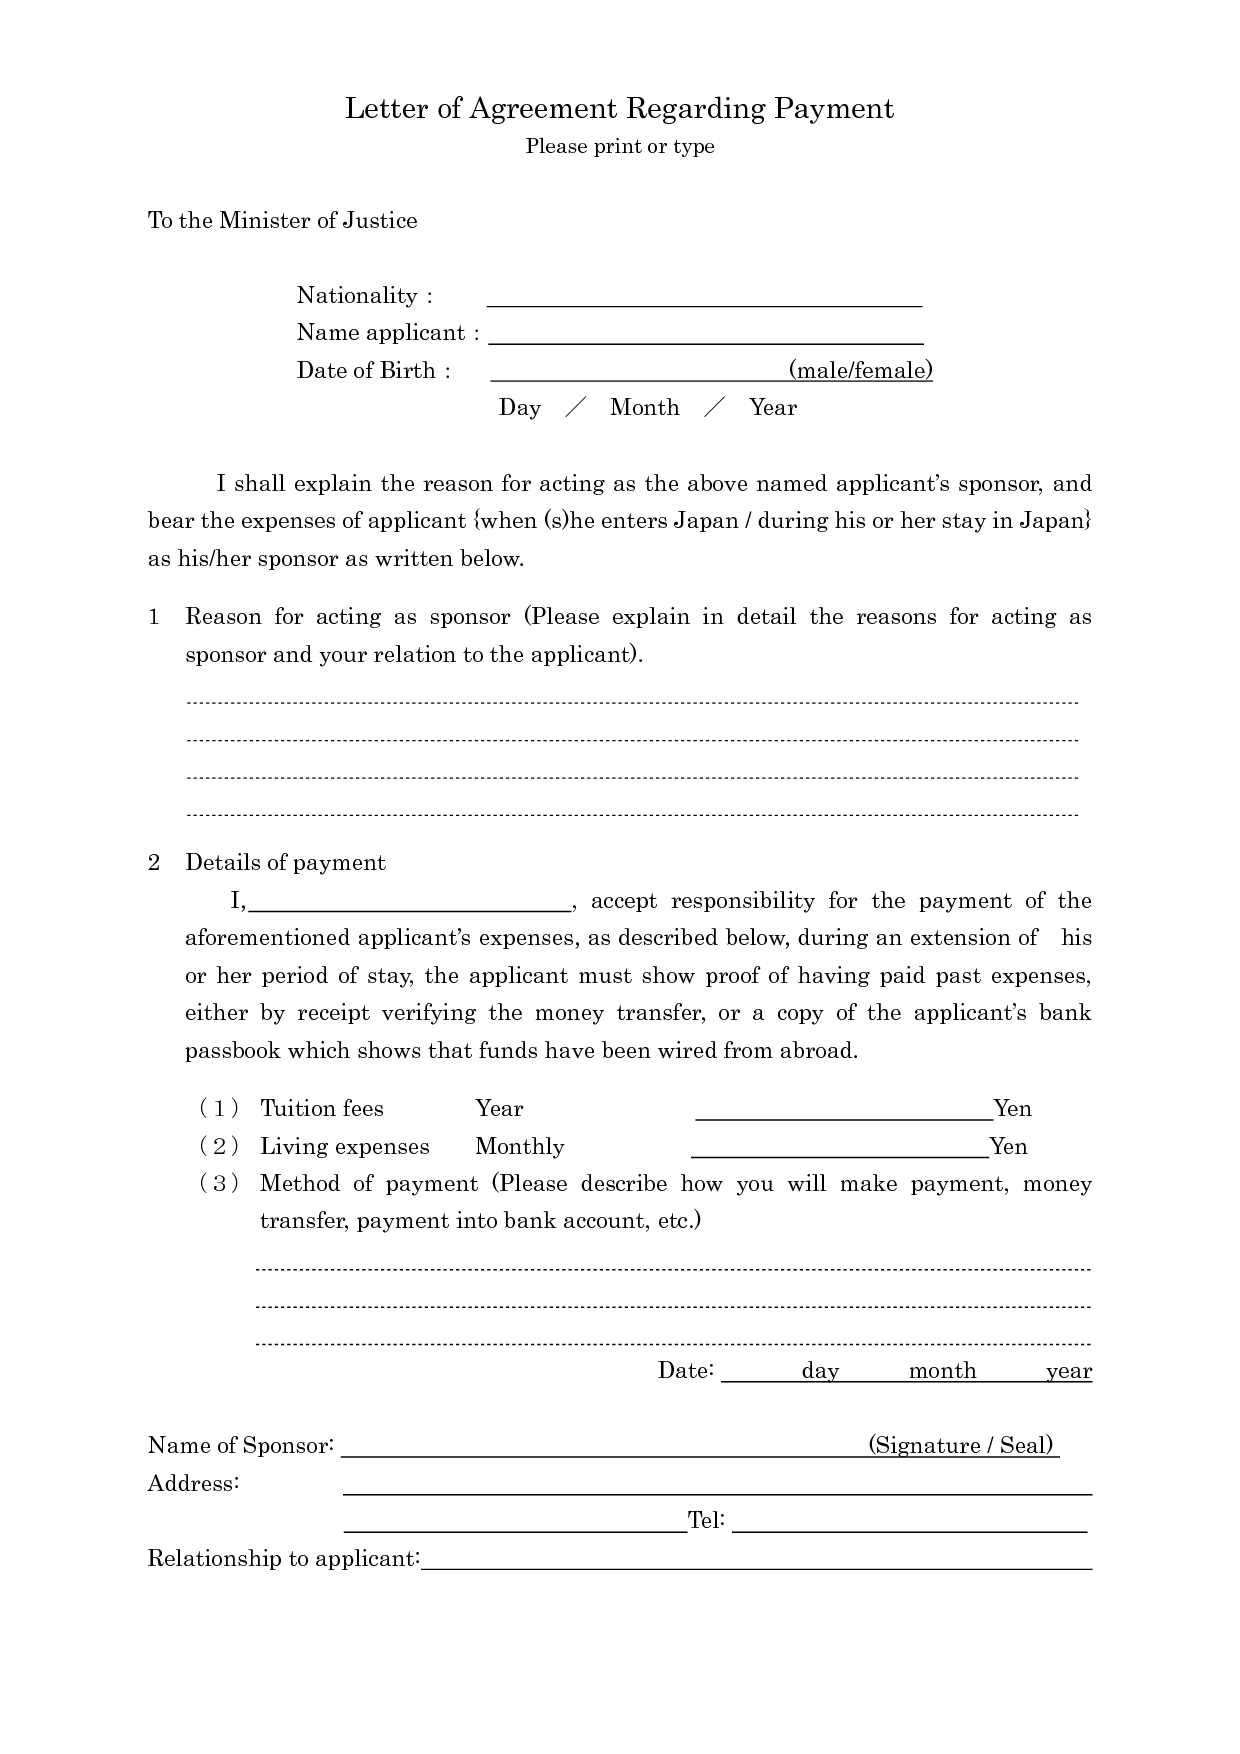 Payment Agreement Letter Template - 20 Inspirational Payment Agreement Letter Examples